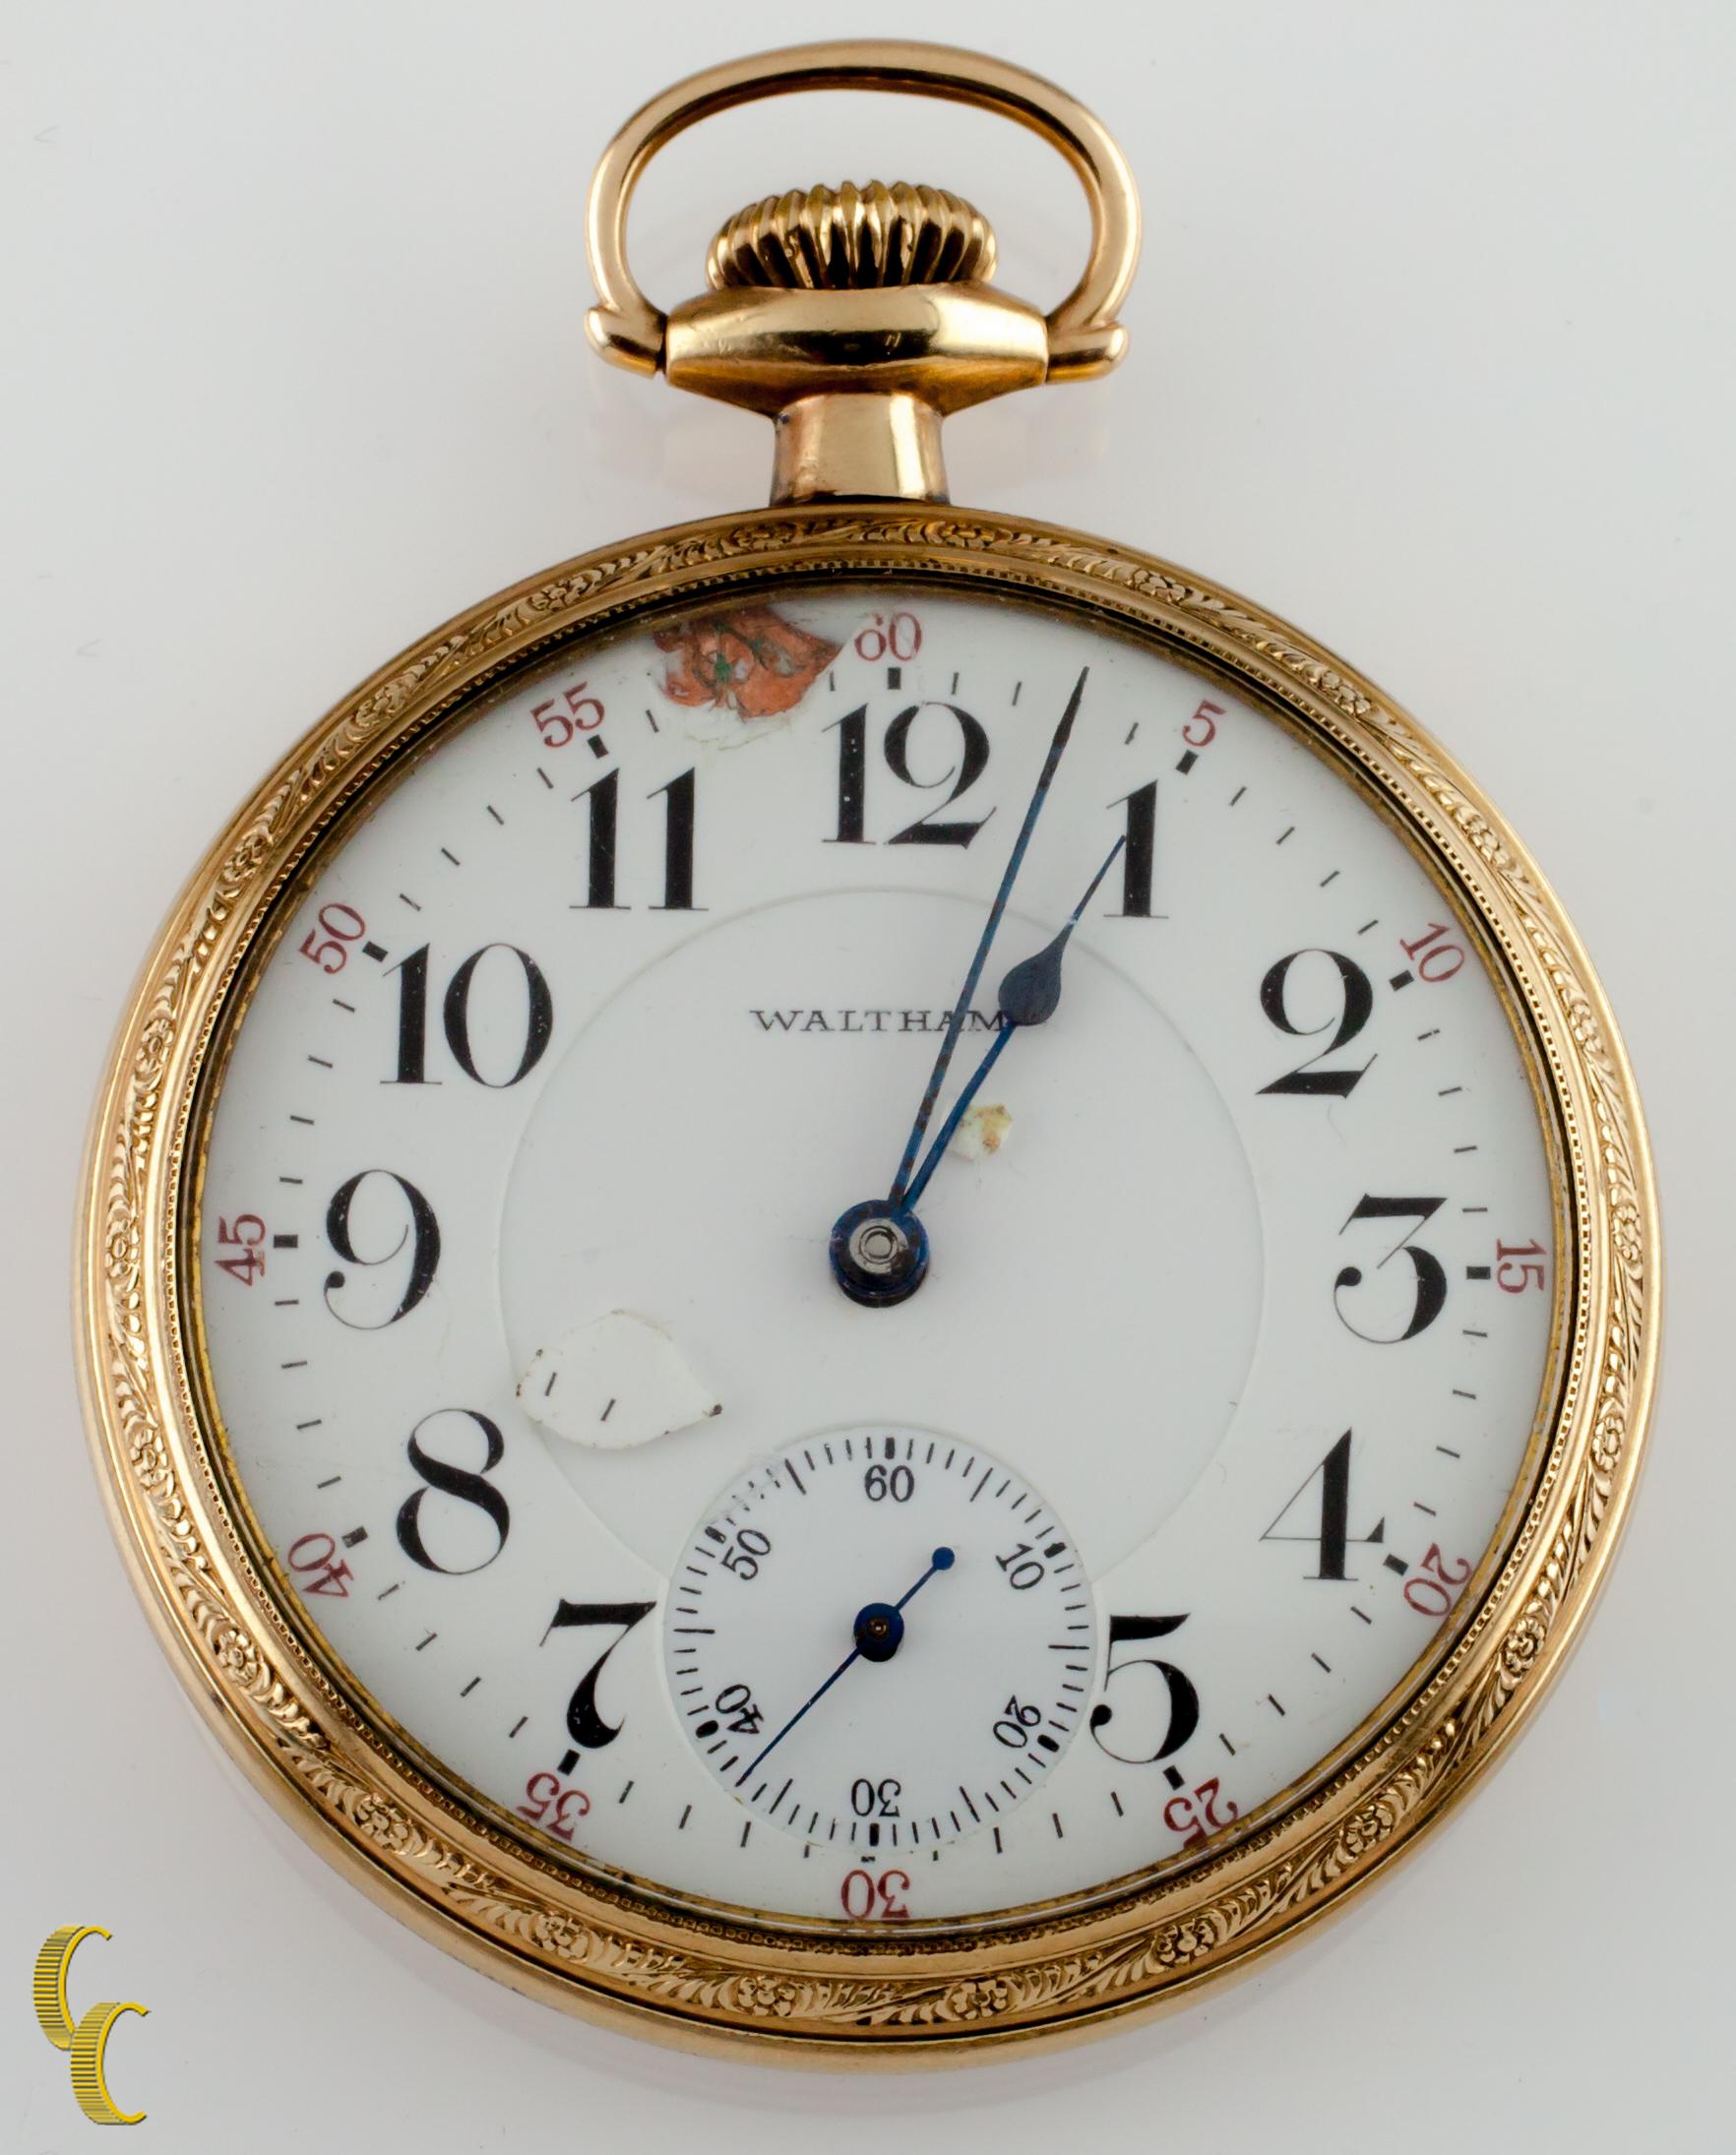 Beautiful Antique Waltham Pocket Watch w/ White Dial Including Cobalt Blue Hands & Dedicated Second Dial
14k Yellow Gold Filled Case Case w/ Intricate Engraved Design on Reverse of Case
Black Arabic Numerals
Case Serial #6417667
23-Jewel Waltham